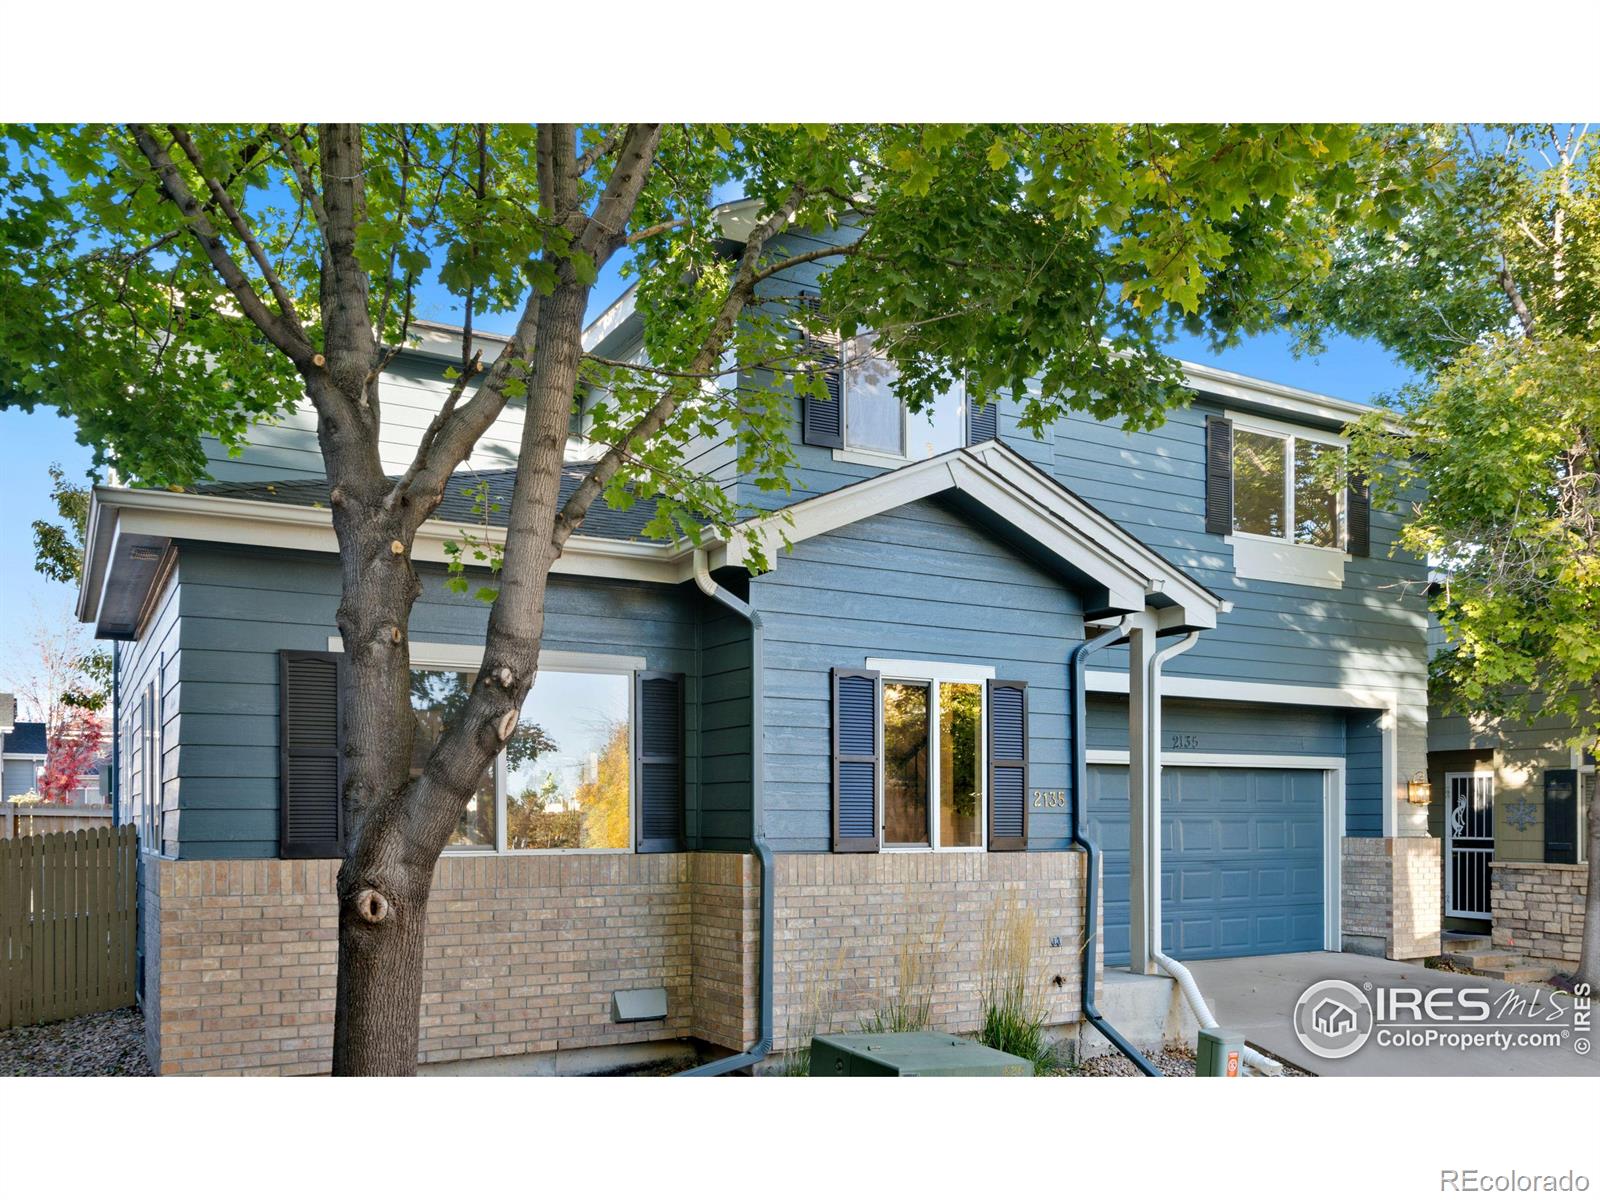 2135 w 101st circle, Thornton sold home. Closed on 2023-12-20 for $495,000.